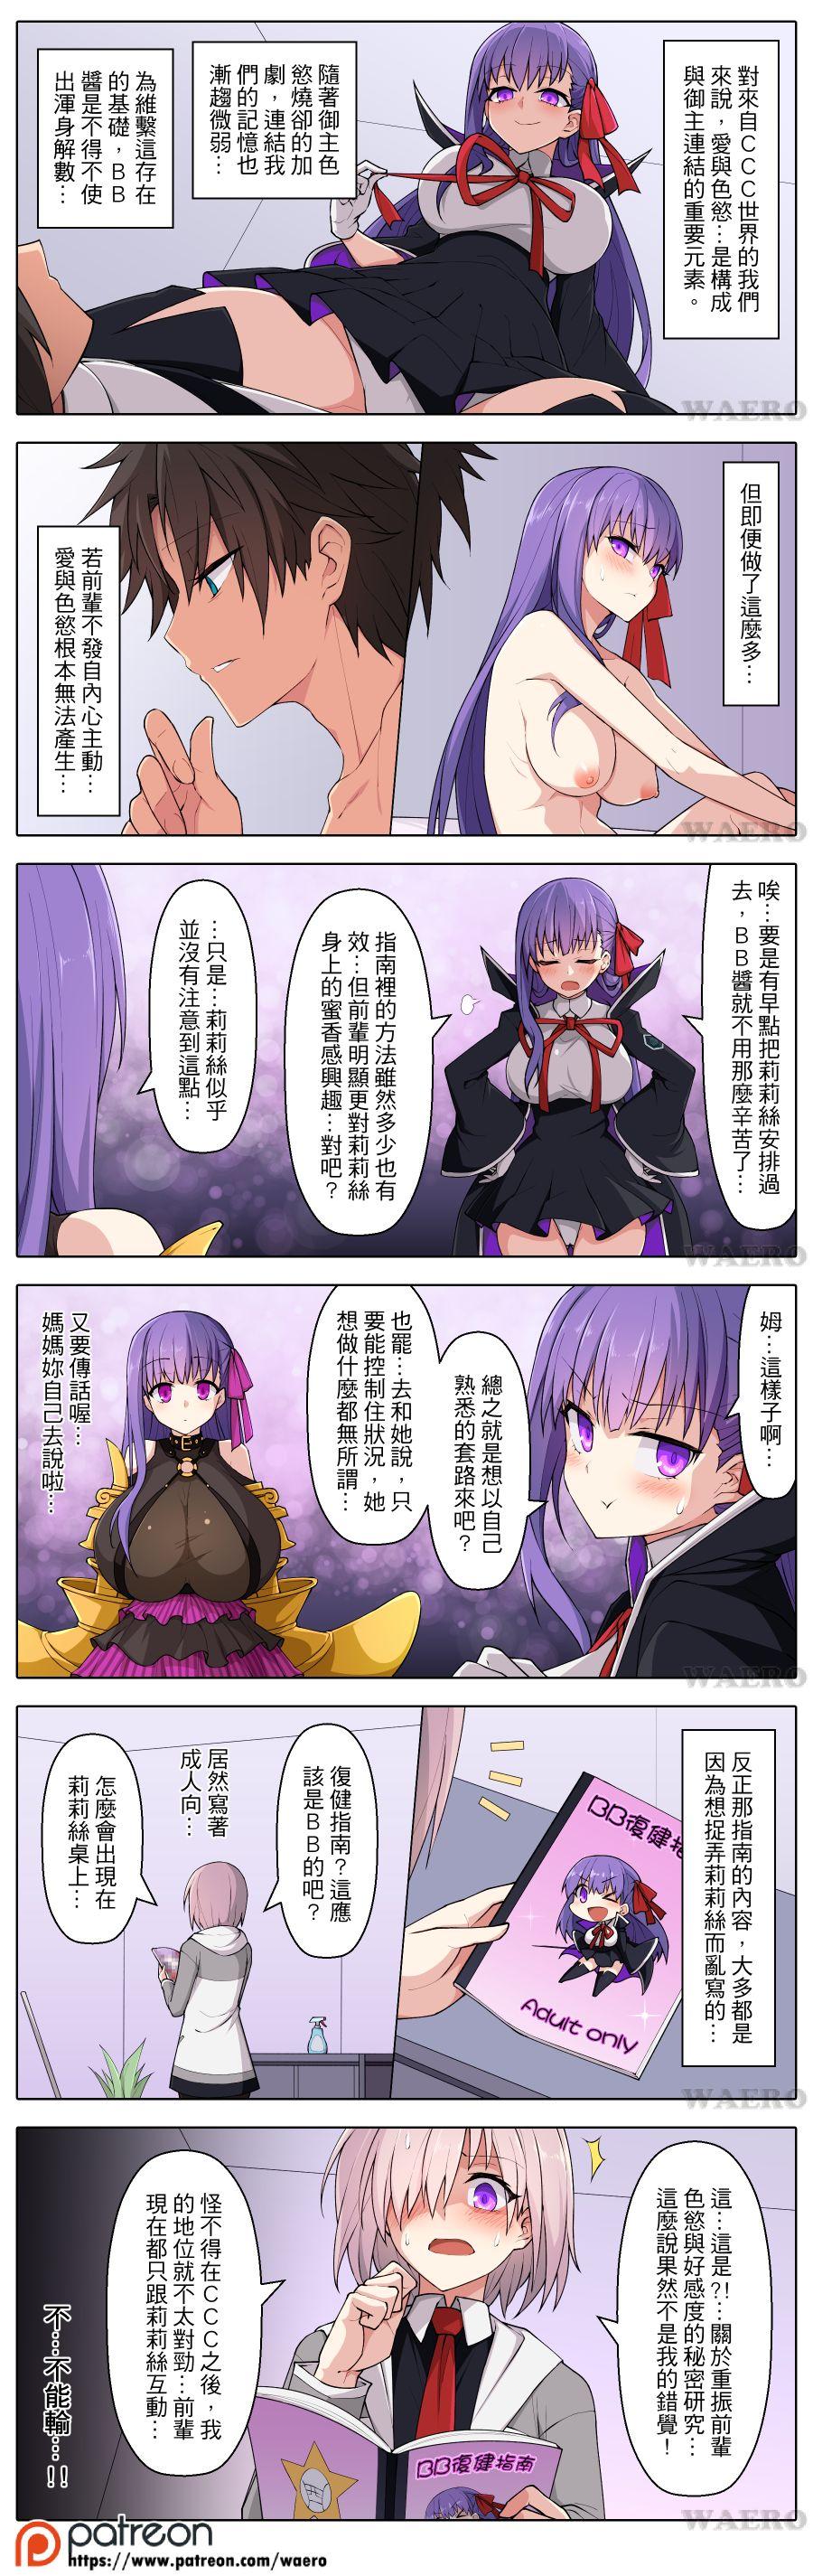 Flexible Lust Grand Order - Fate grand order Free Amateur - Page 4